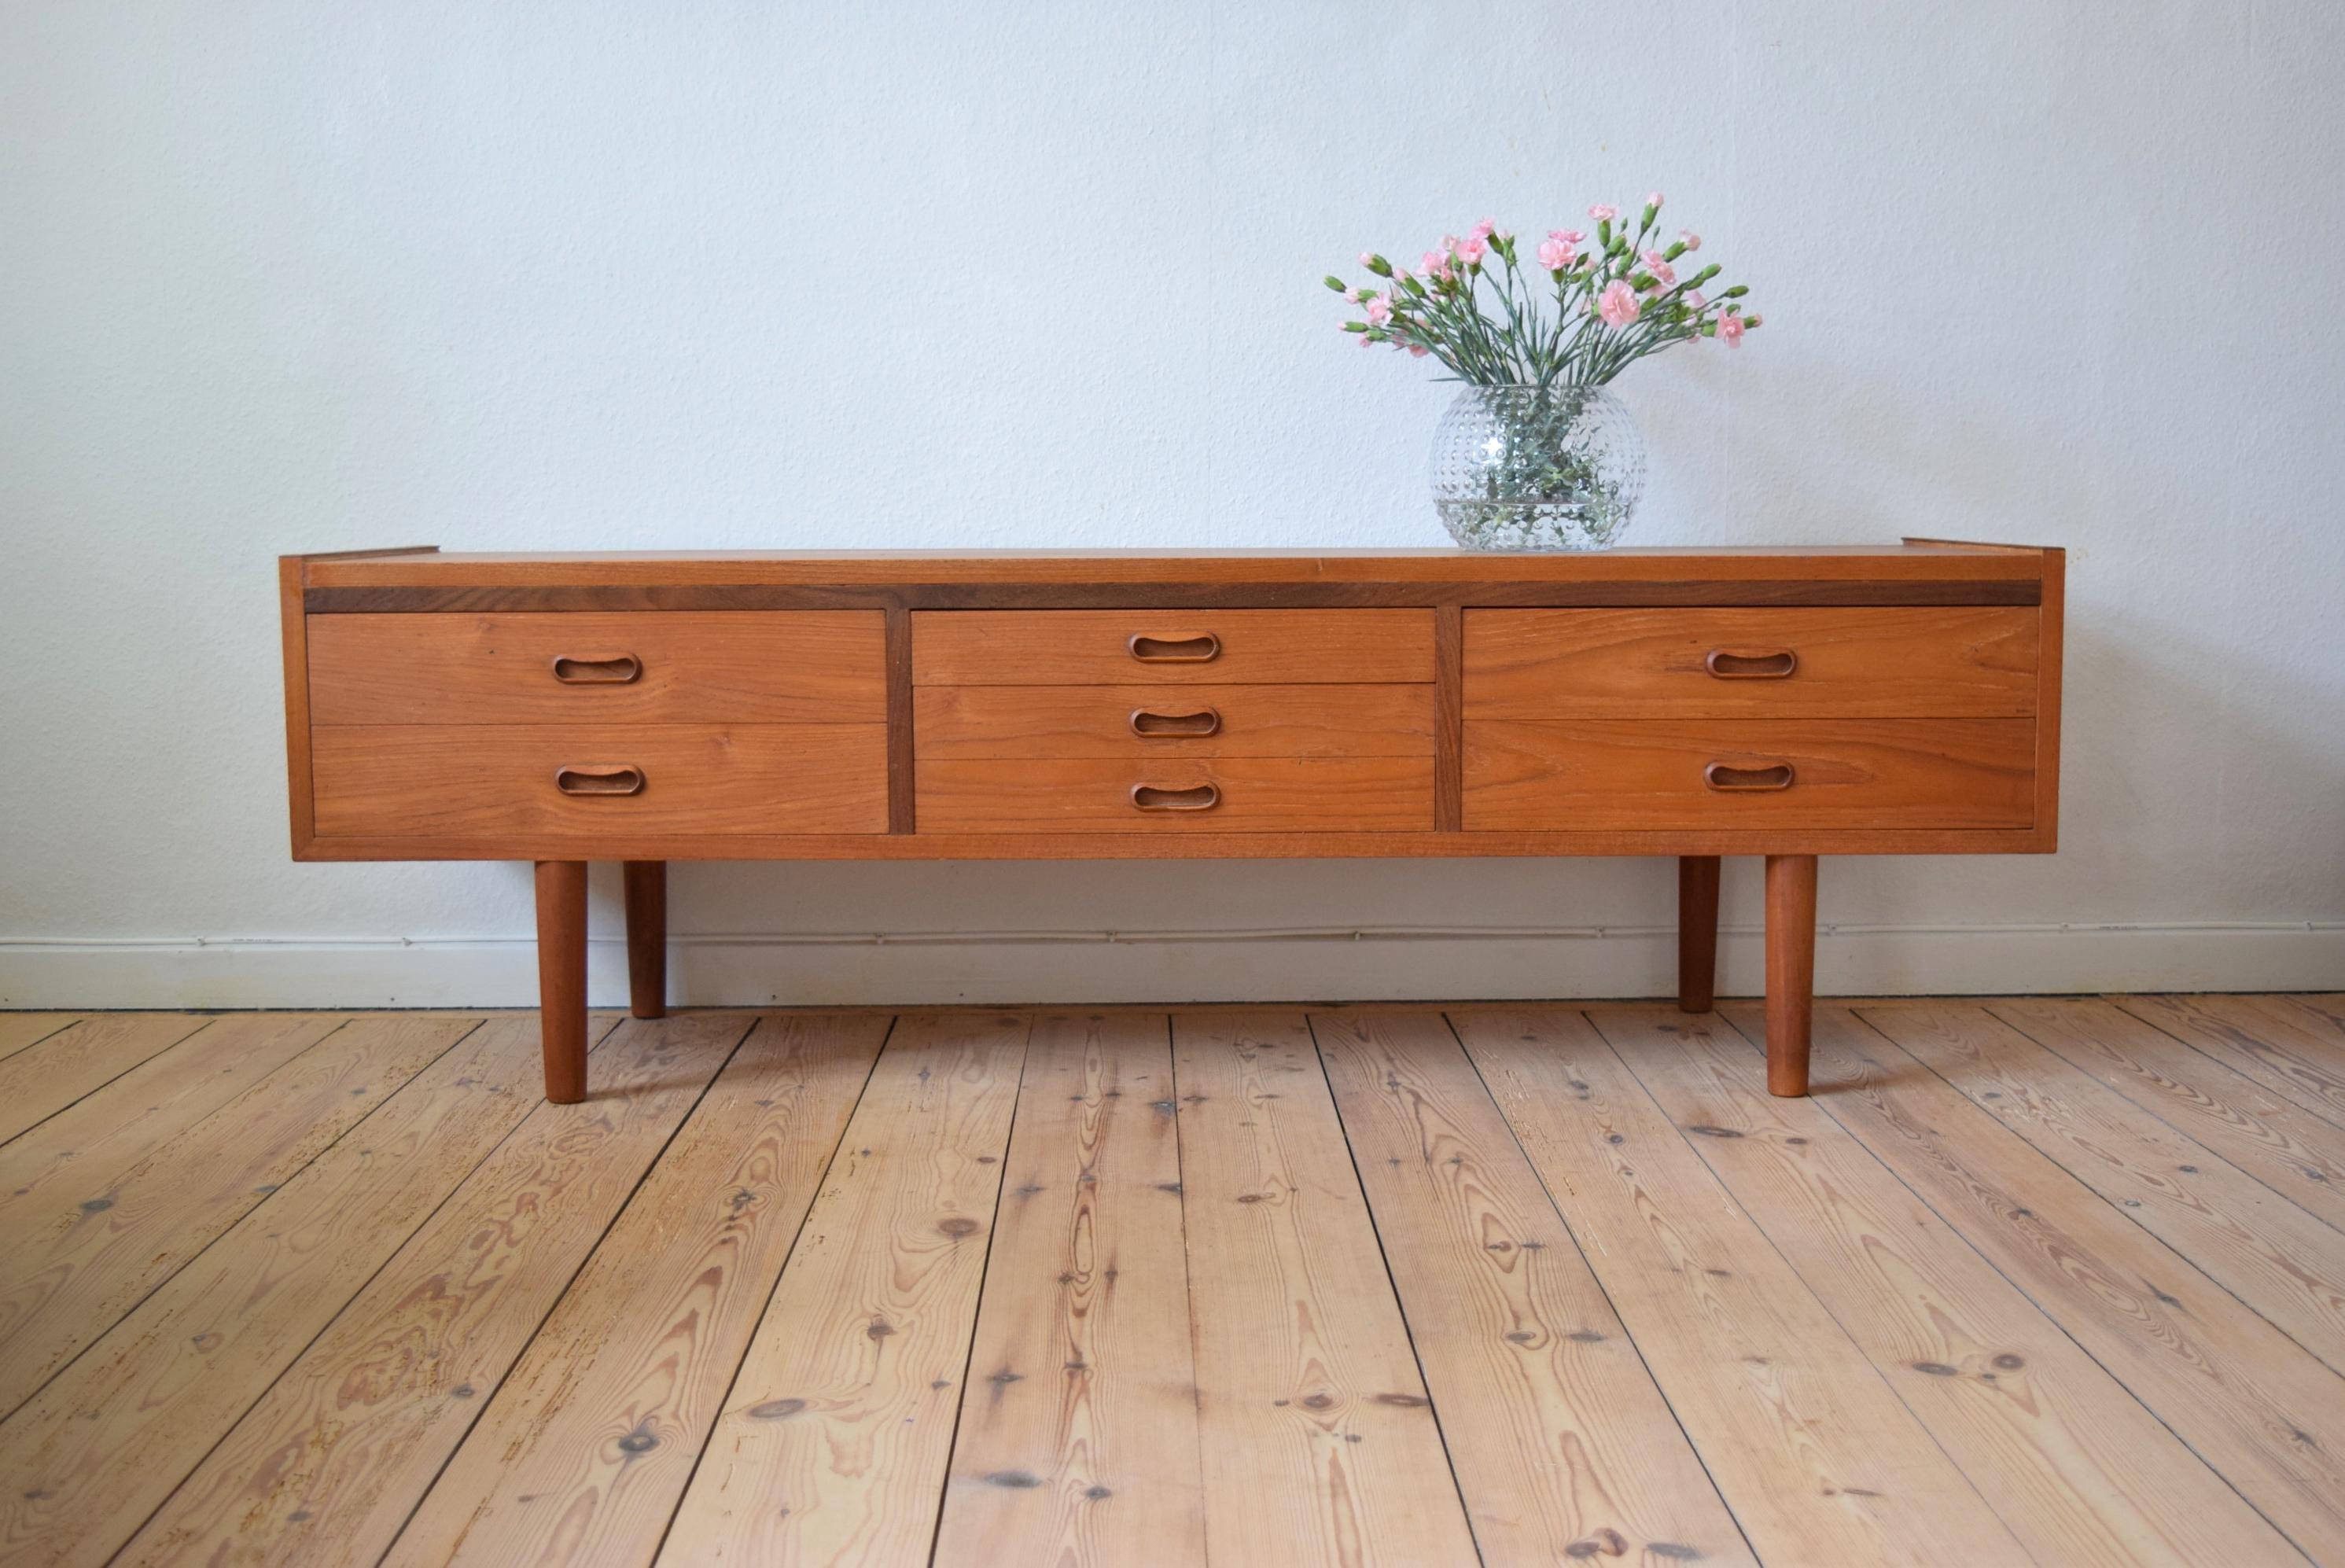 Elegant, low teak chest with seven drawers, circa 1960. This chest can be used as either a storage unit or as a platform for a TV of multimedia components. In good condition with few marks.